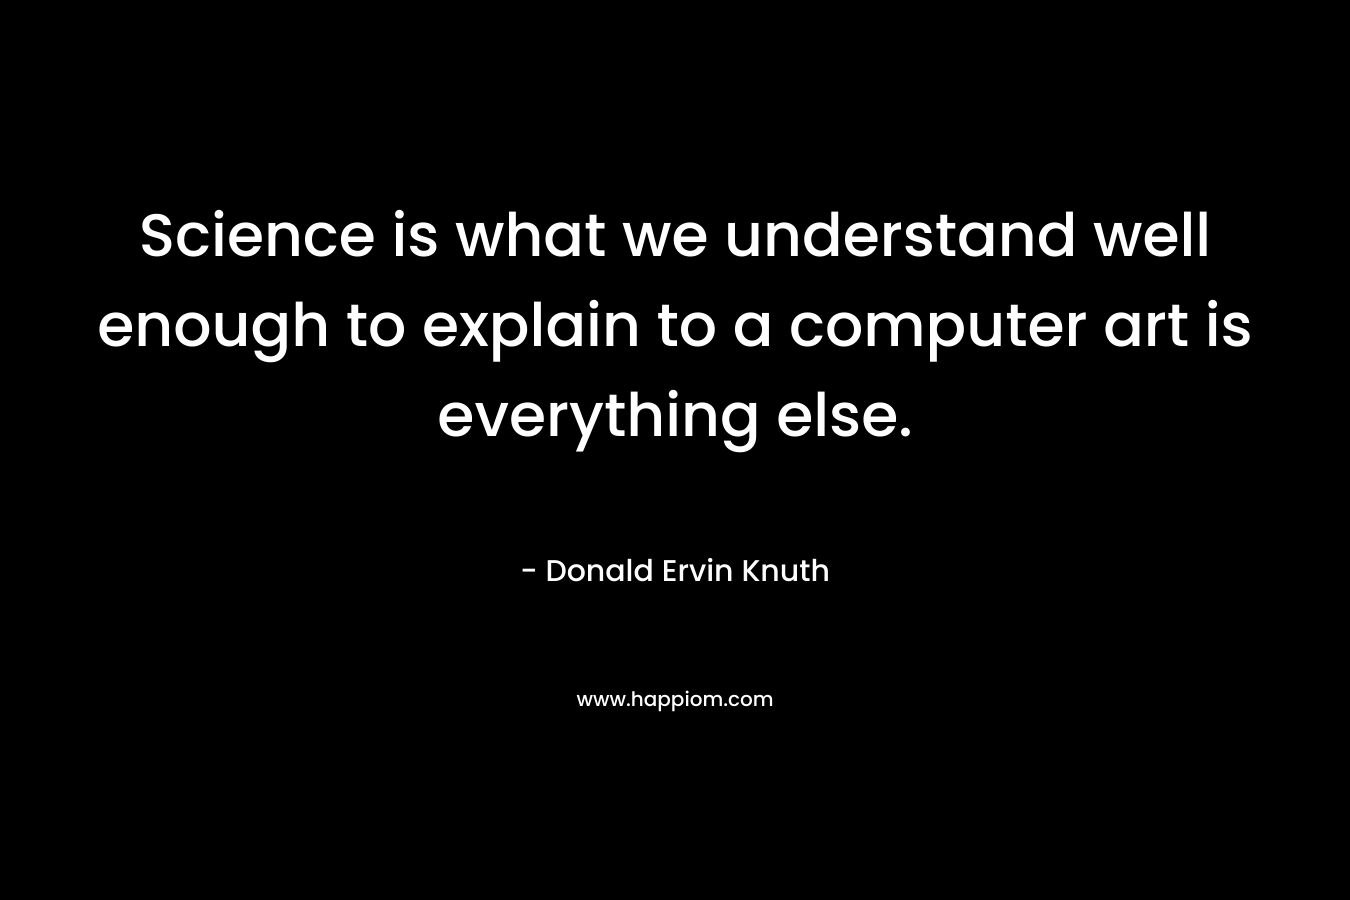 Science is what we understand well enough to explain to a computer art is everything else.